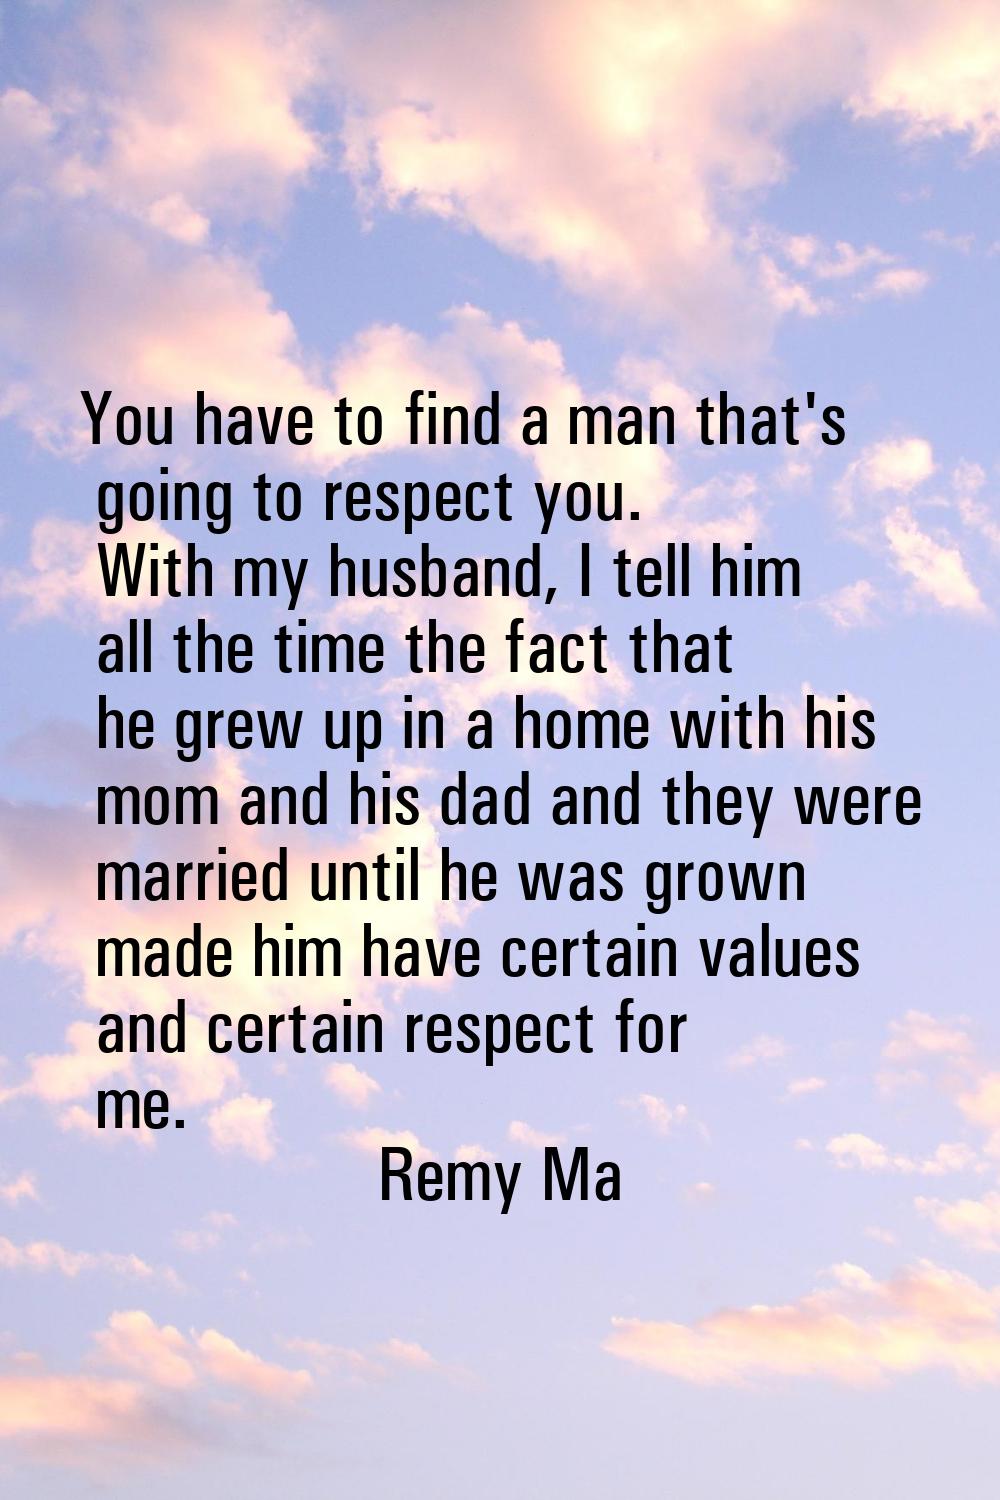 You have to find a man that's going to respect you. With my husband, I tell him all the time the fa